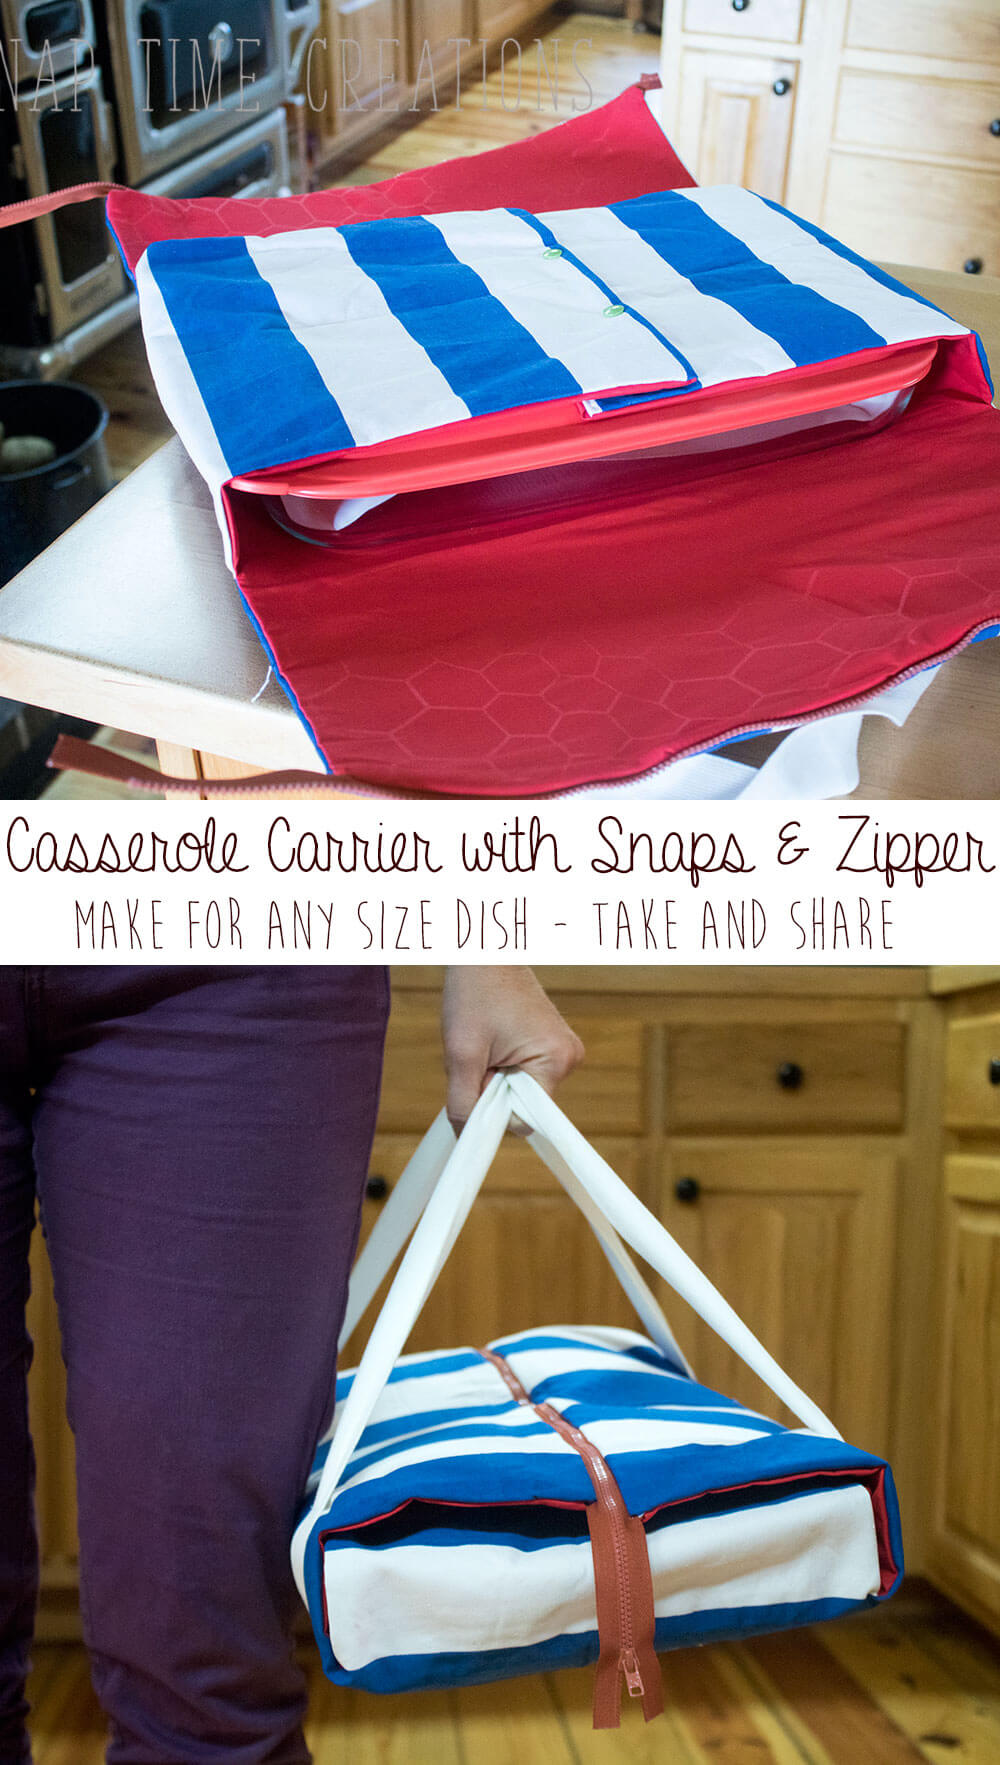 casserole carrier with zipper tutorial -snaps-for-bake-and-take-meals-from-Nap-Time-Creations